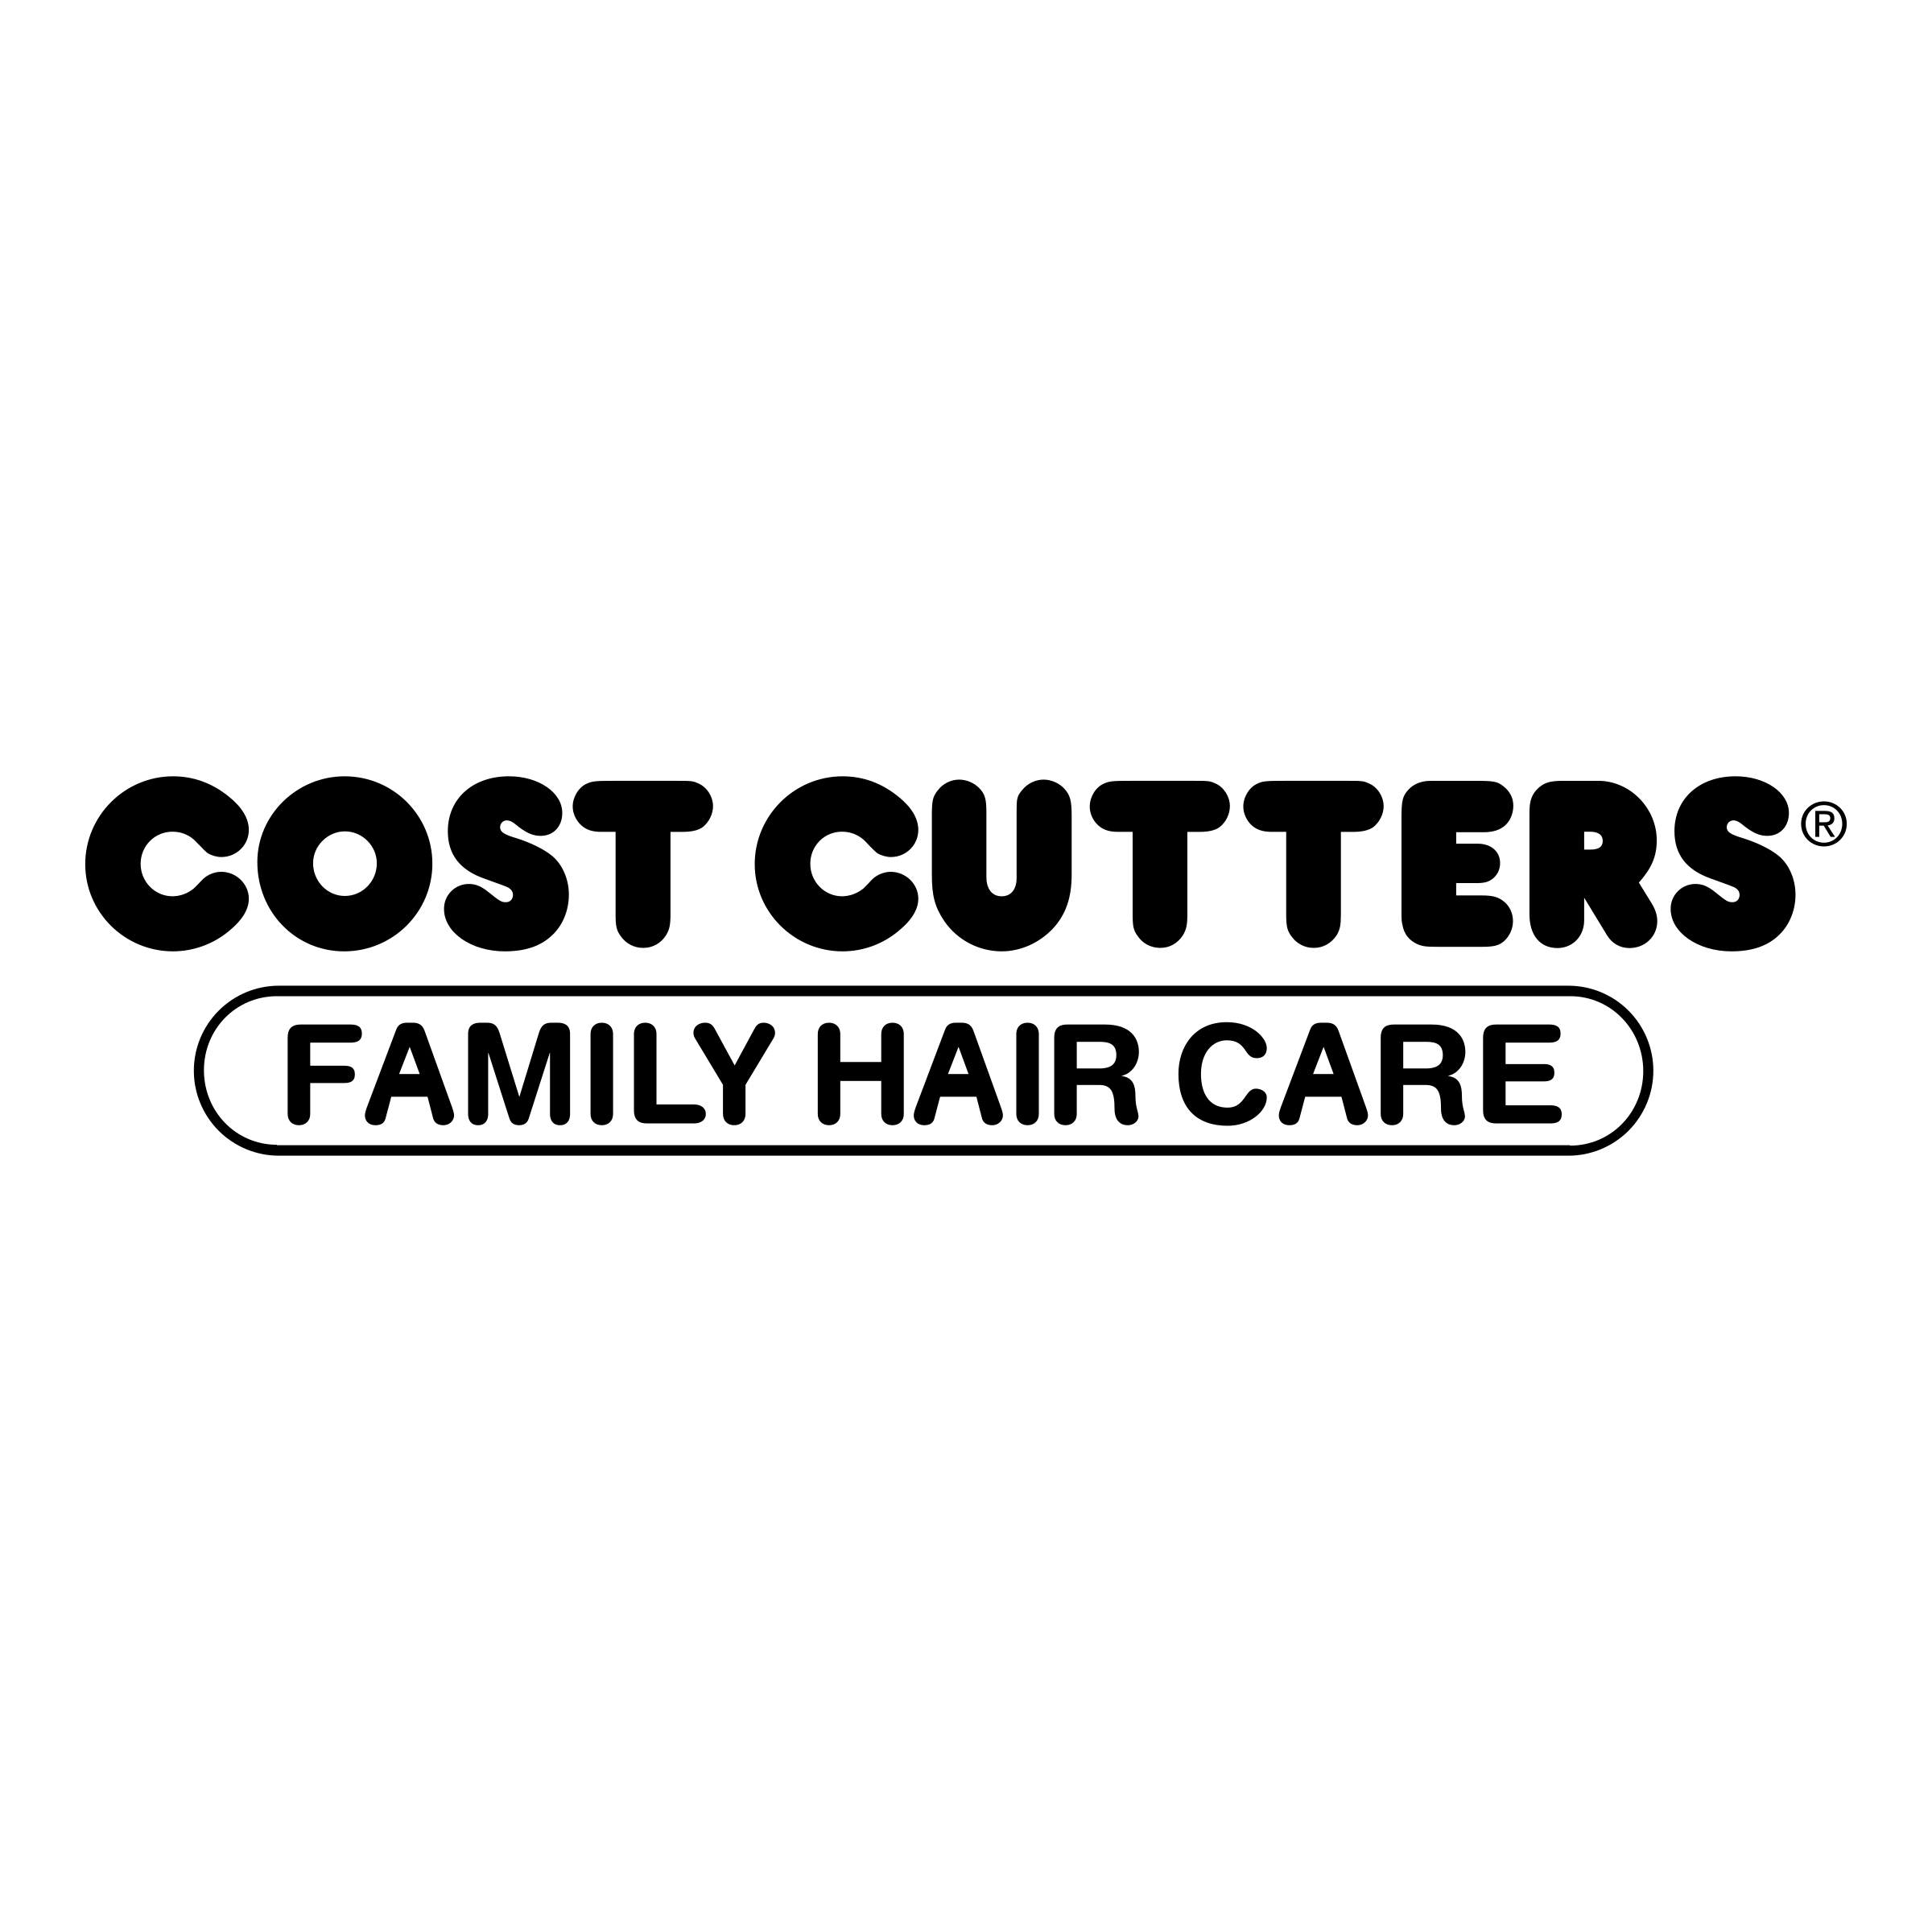 Cutters Logo - Cost Cutters Logo PNG Transparent & SVG Vector - Freebie Supply